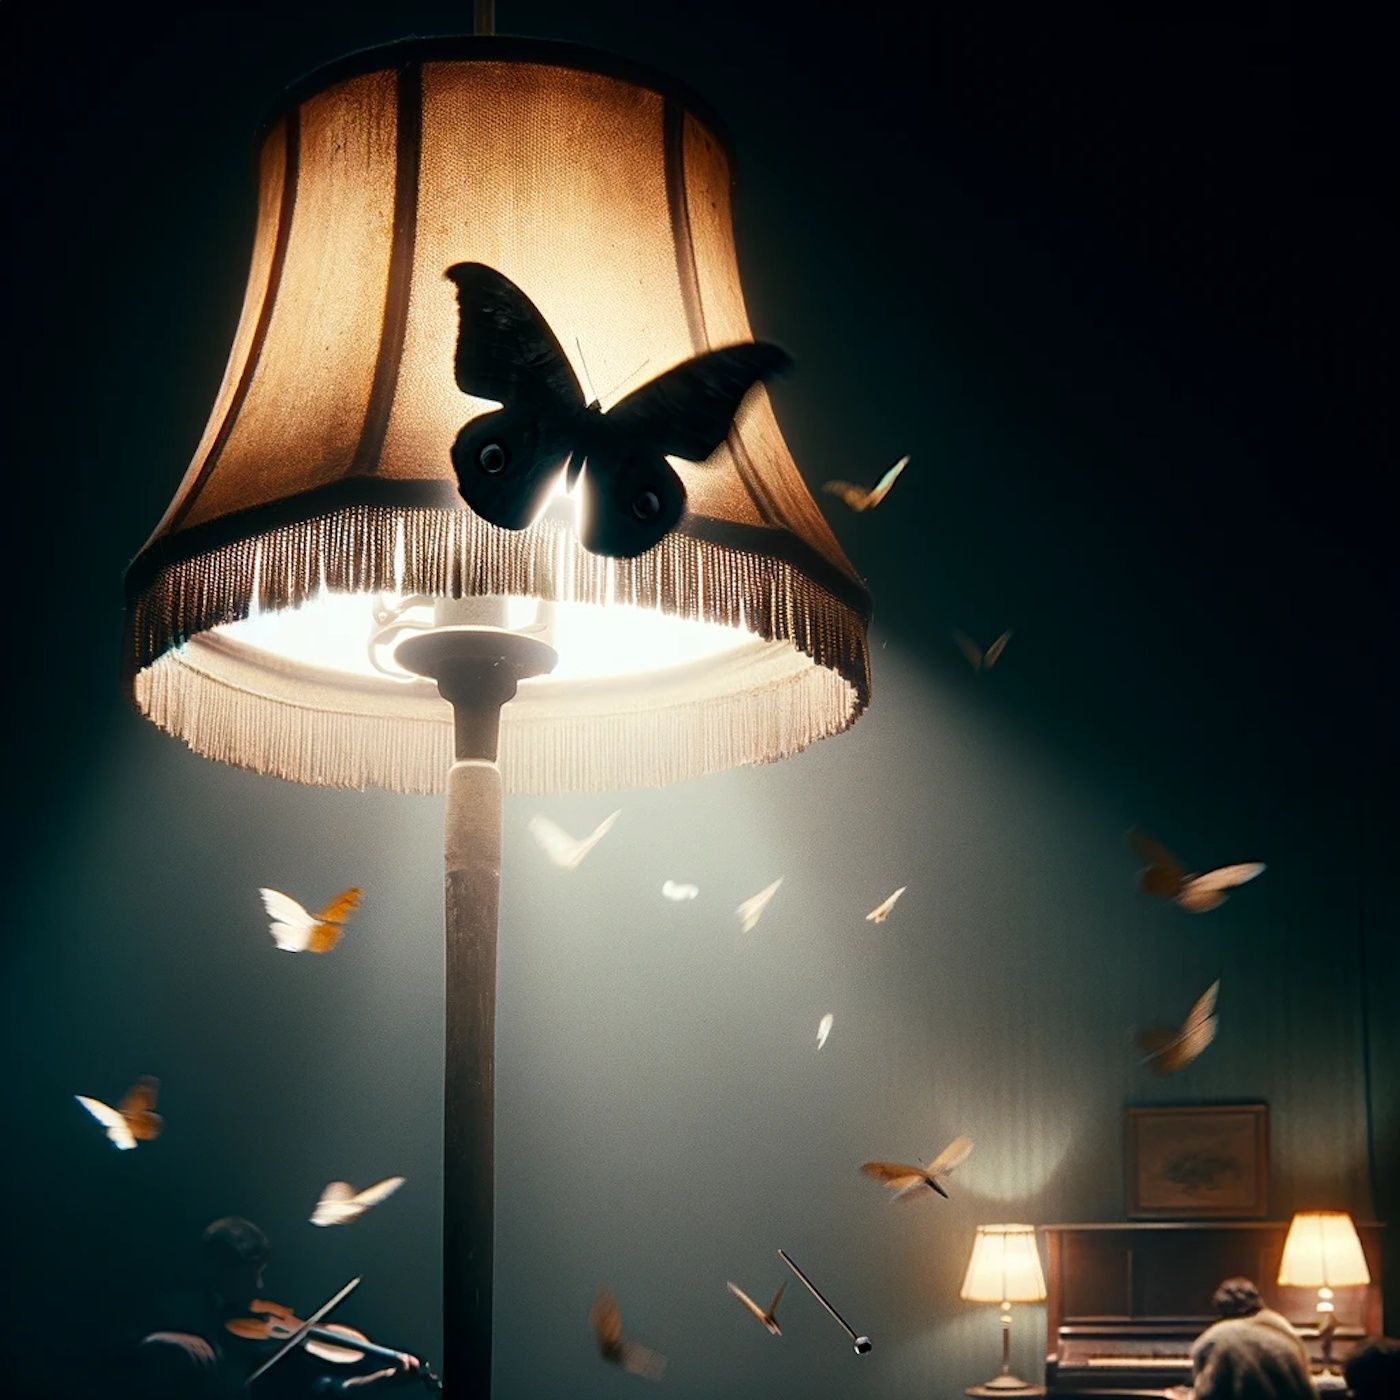 "Up out of the lampshade, startled by the overhead light, flew a large nocturnal butterfly that began circling the room.."